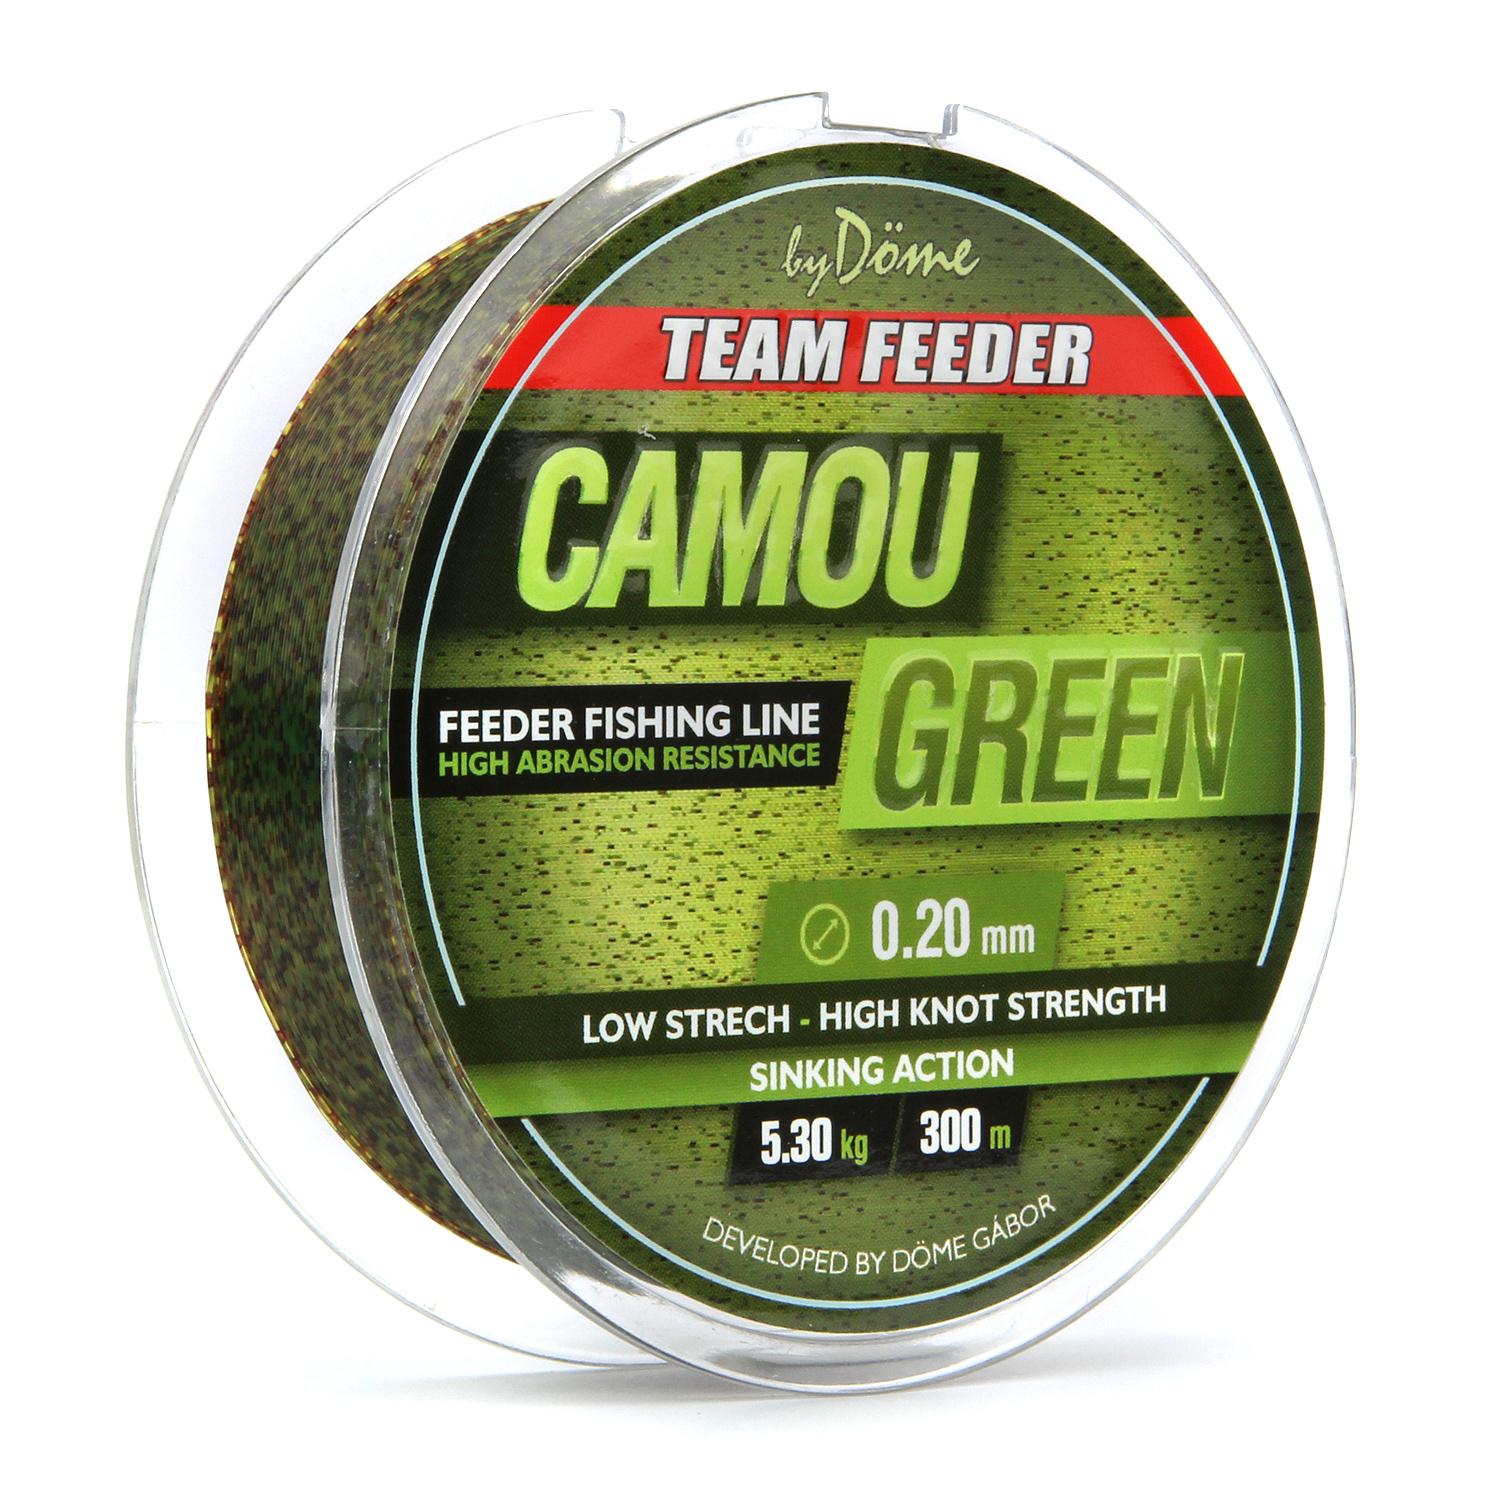 By Dme TF Camou Green 300m 0.20mm